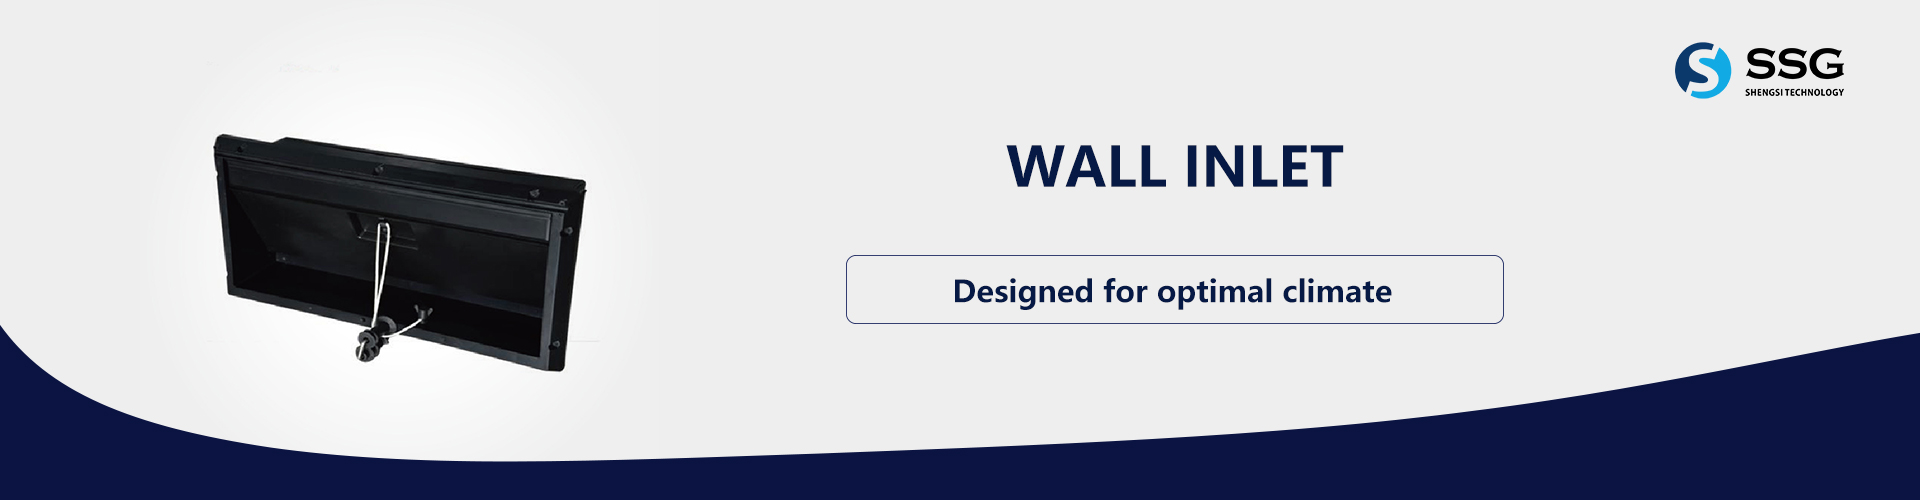 Wall-inlets-banner